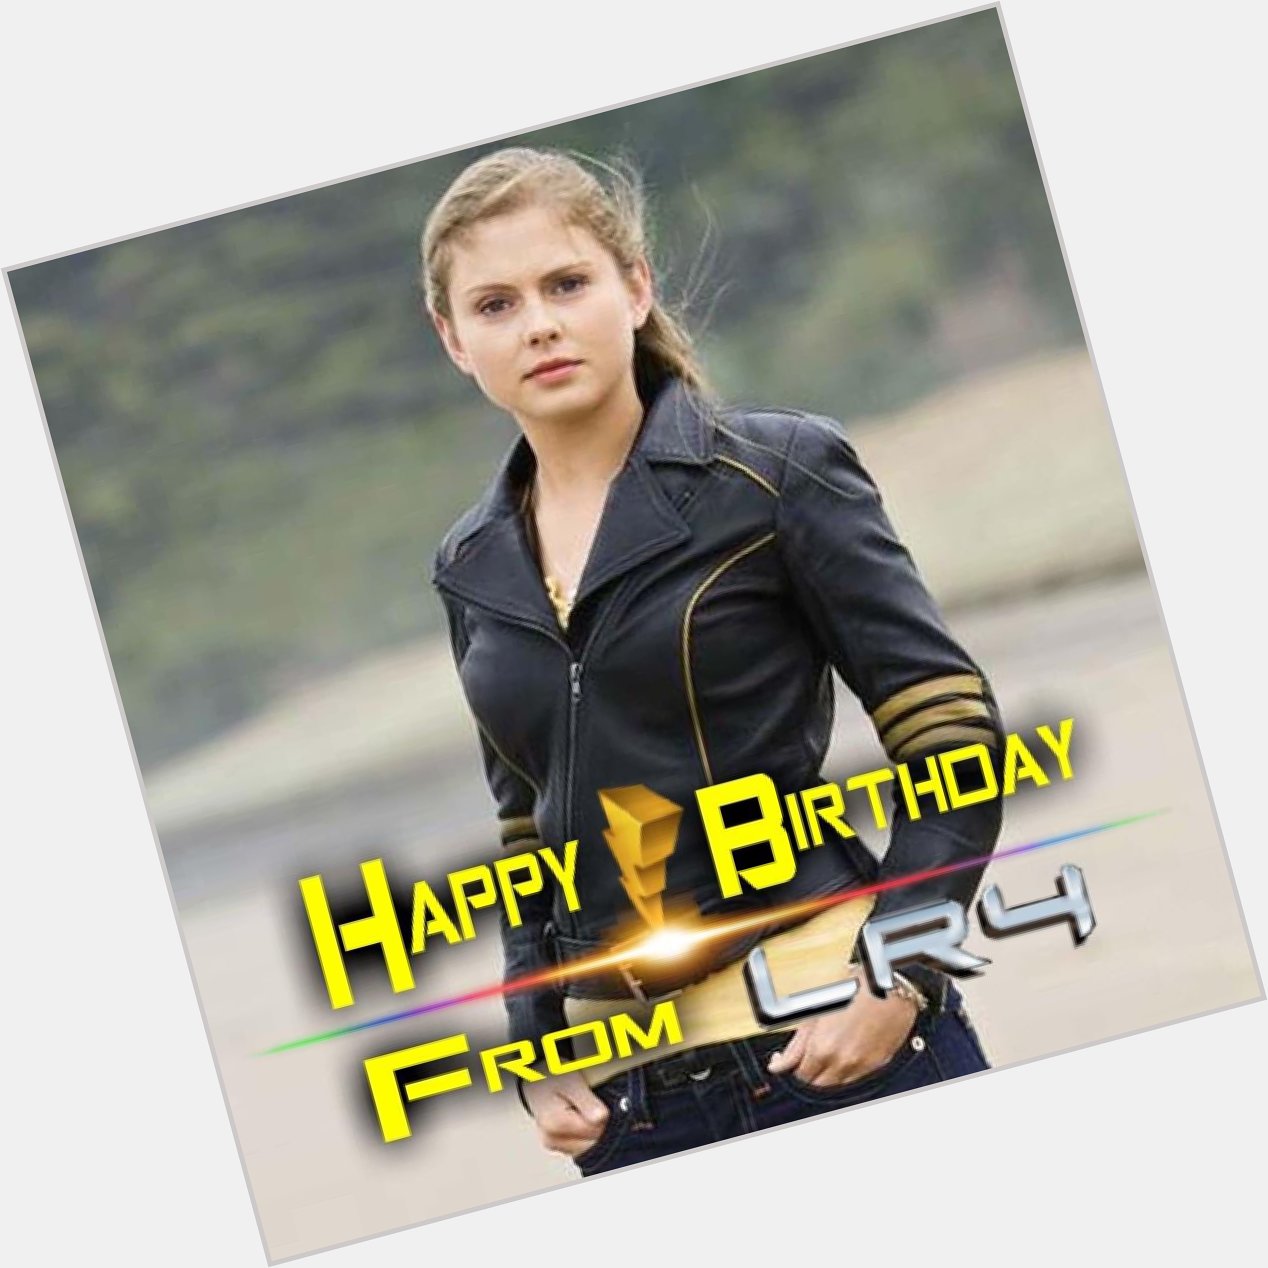 LR4 would like to wish Rose McIver a Happy Birthday! 